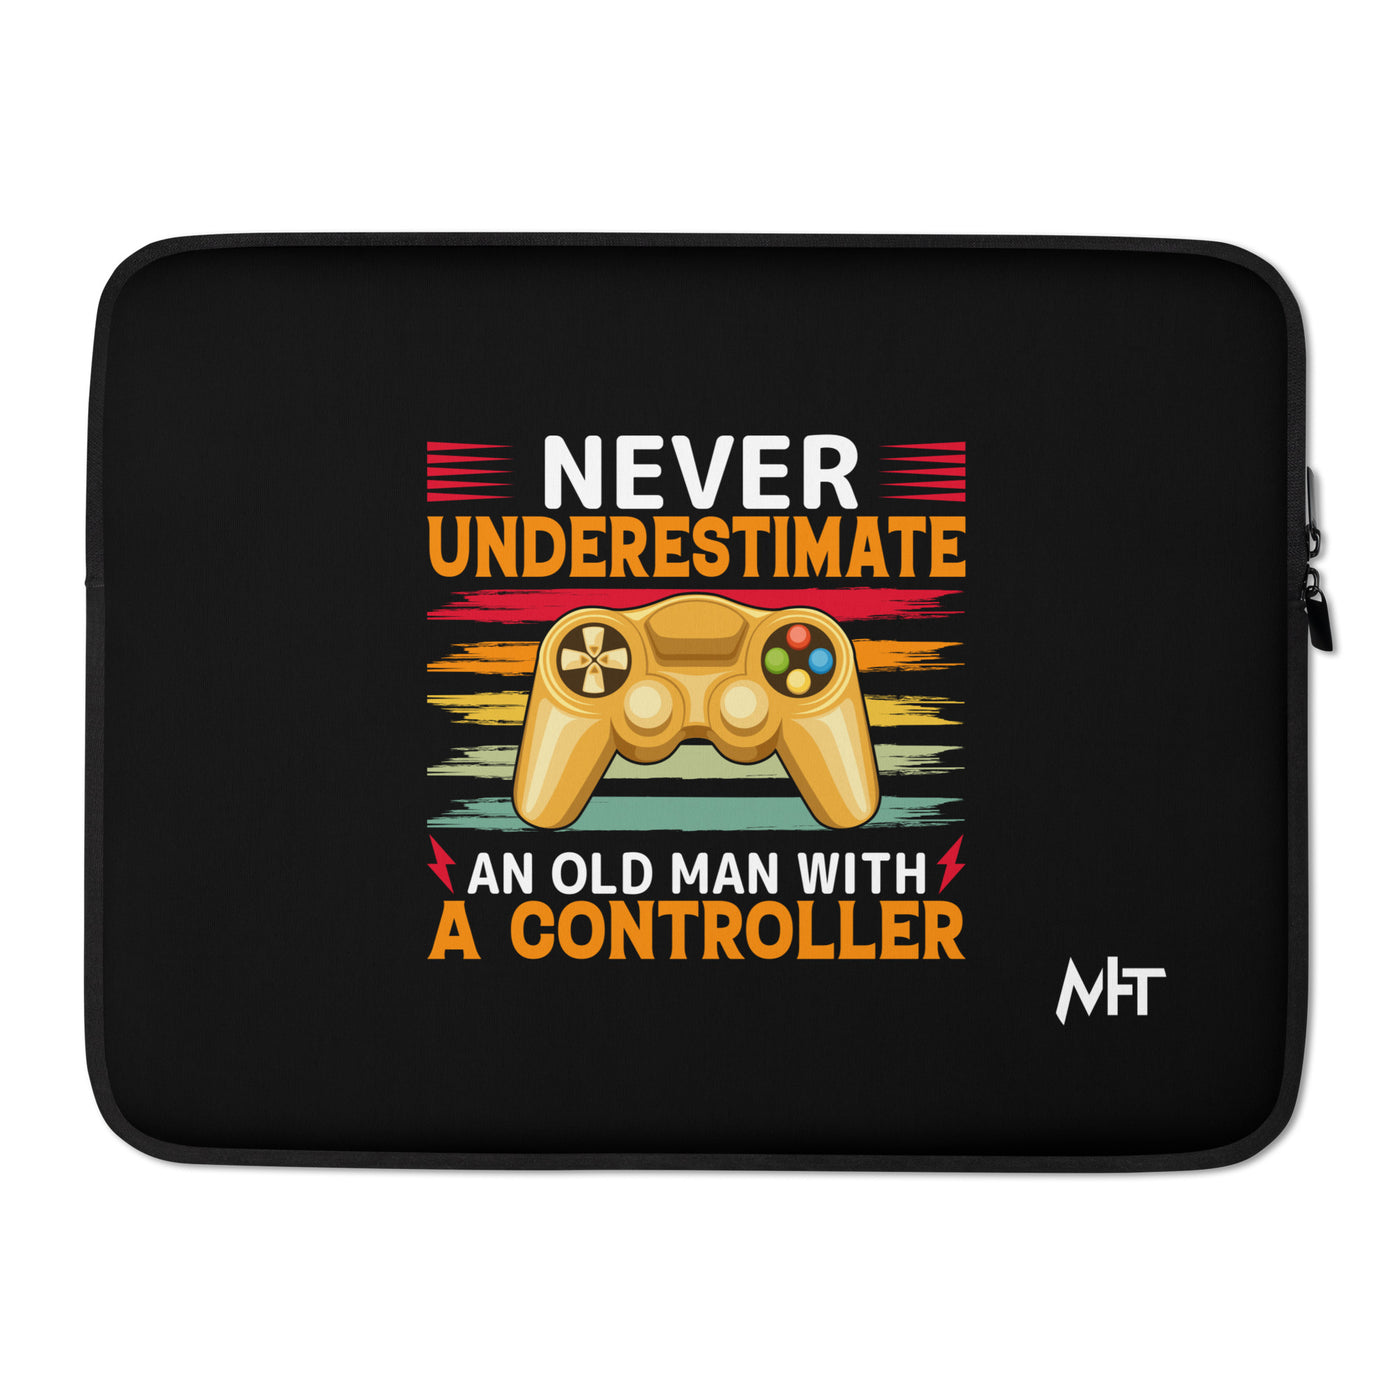 Never Underestimate an old man with a controller - Laptop Sleeve